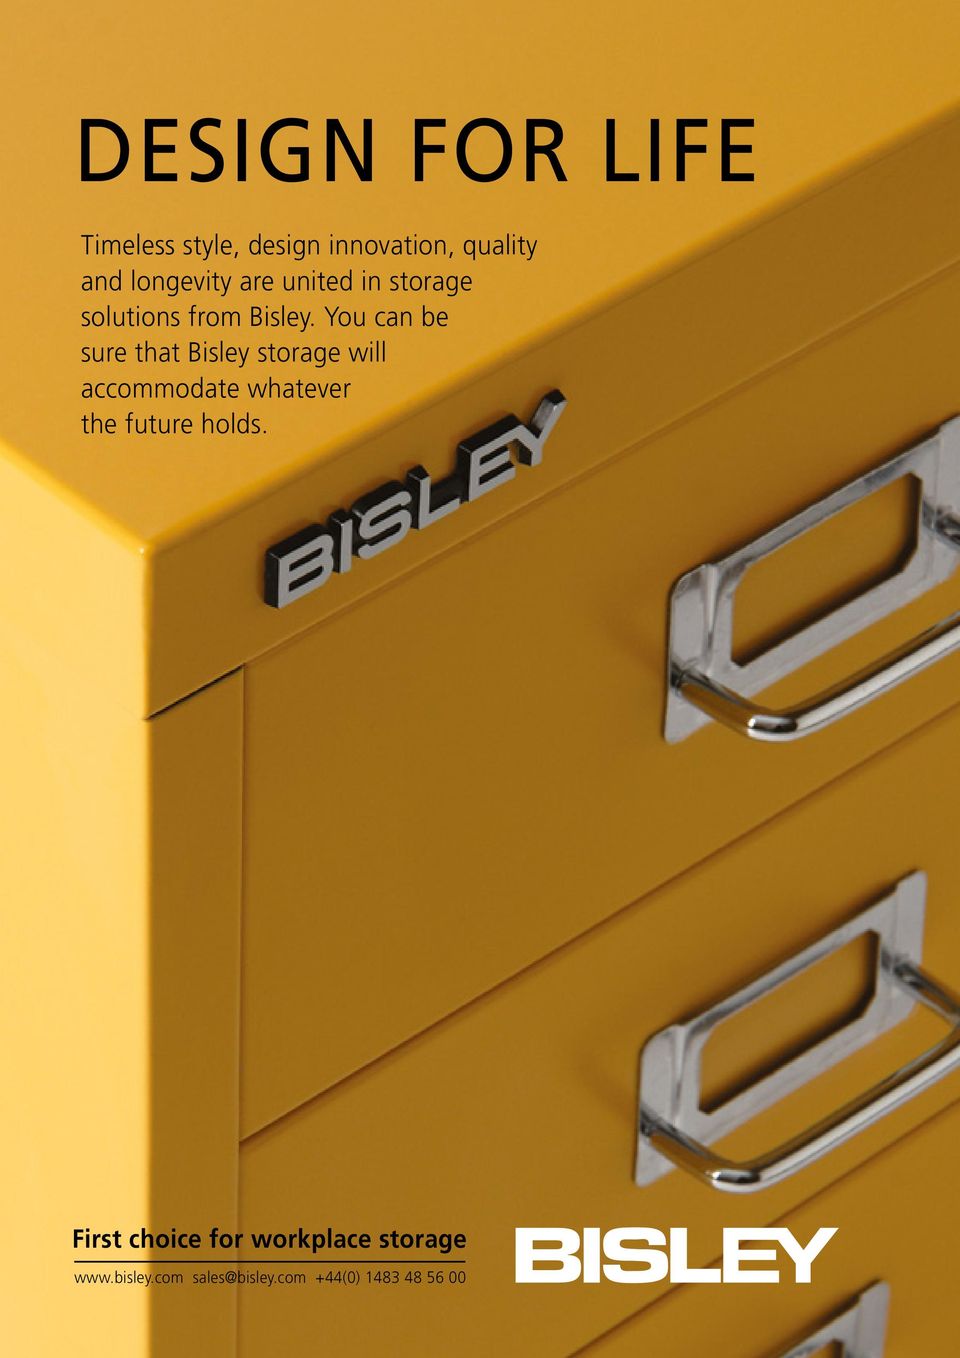 You can be sure that Bisley storage will accommodate whatever the